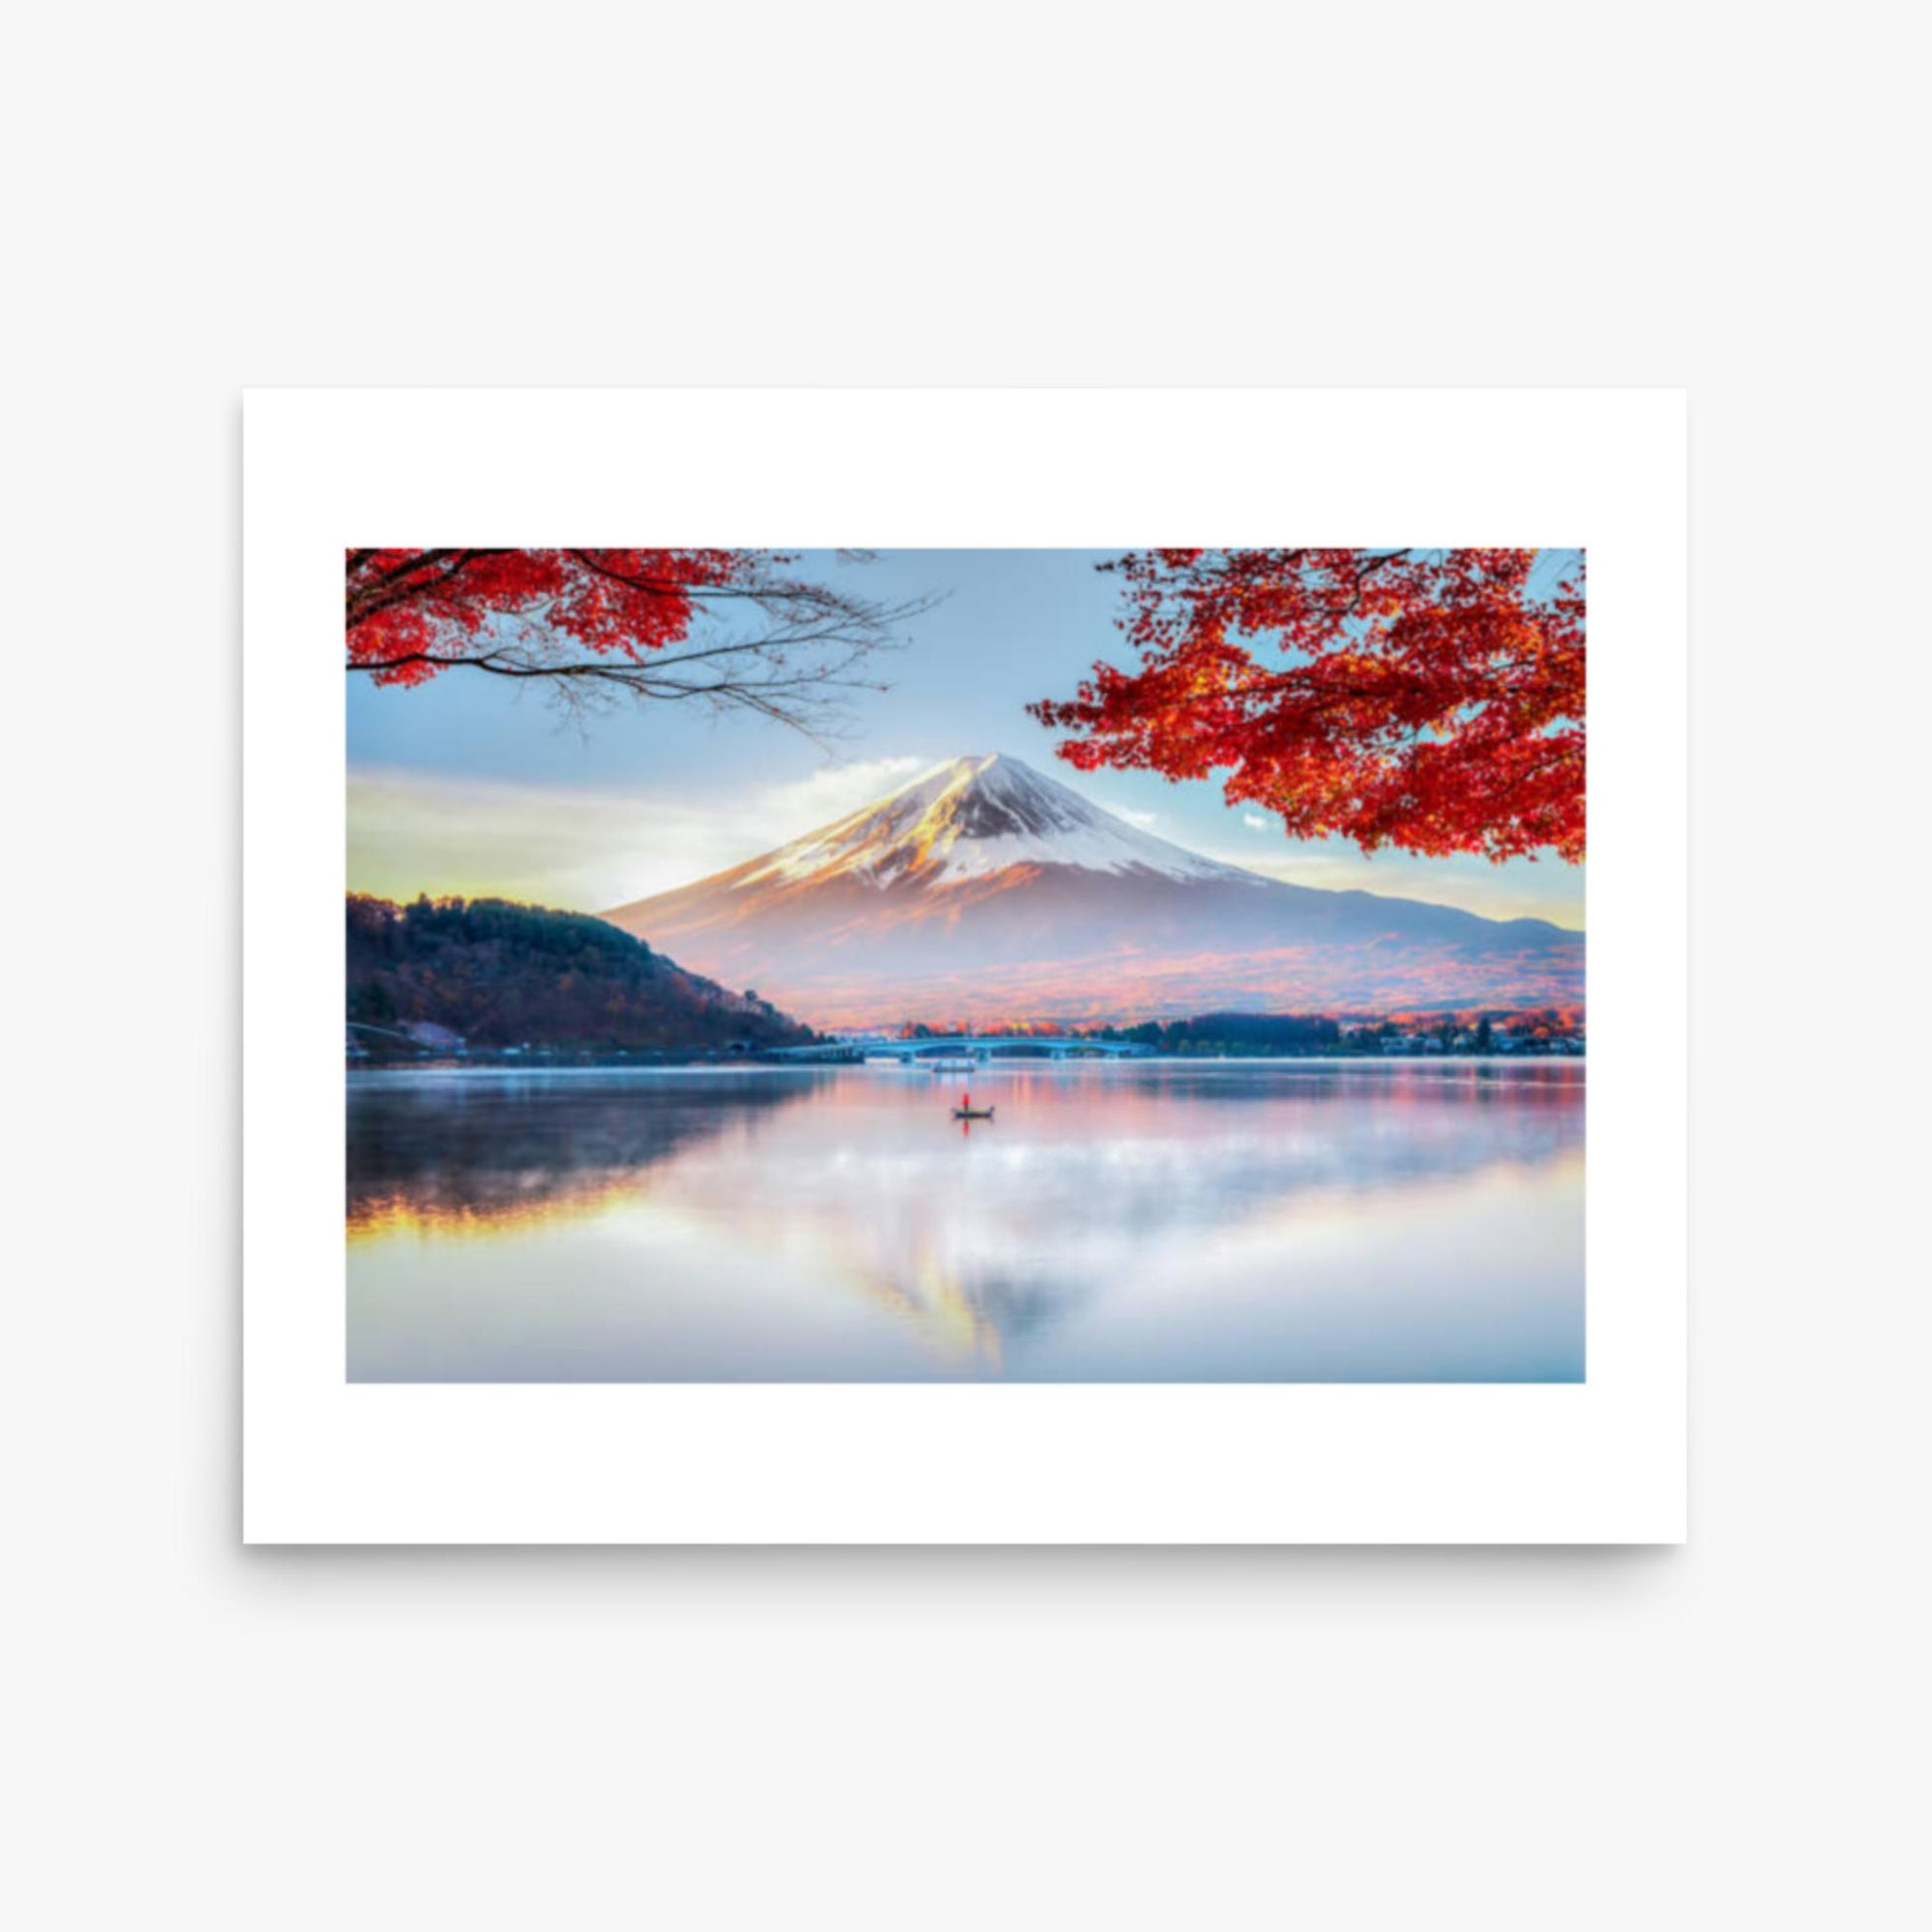 Fuji Mountain , Red Maple Tree and Fisherman Boat with Morning Mist in Autumn, Kawaguchiko Lake, Japan 16x20 in Poster